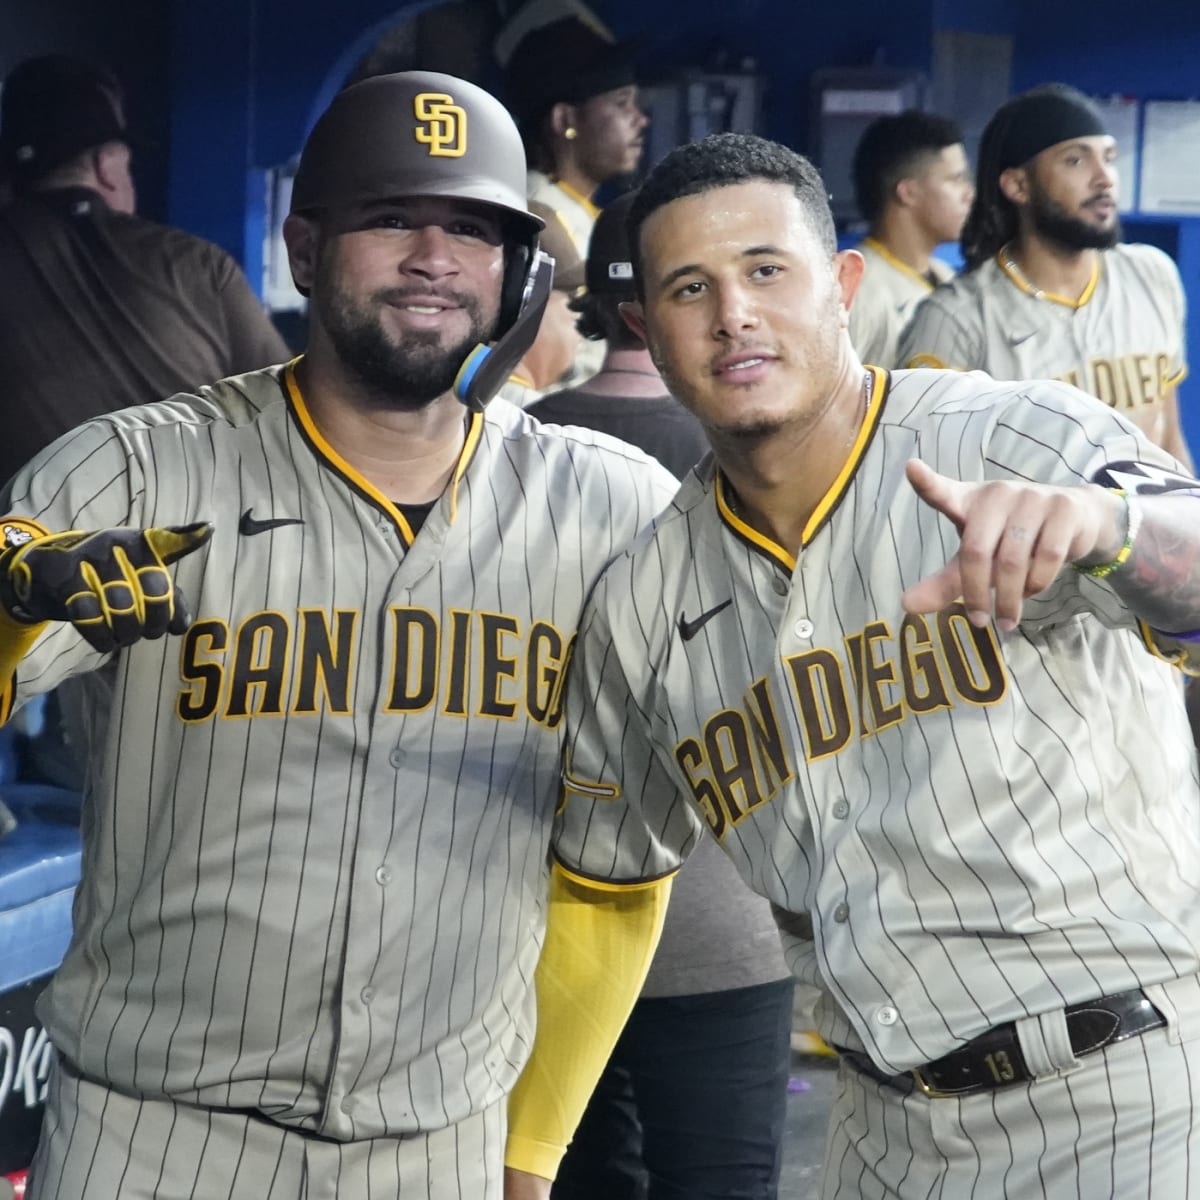 San Diego Padres: Get the Latest News on the San Diego Padres